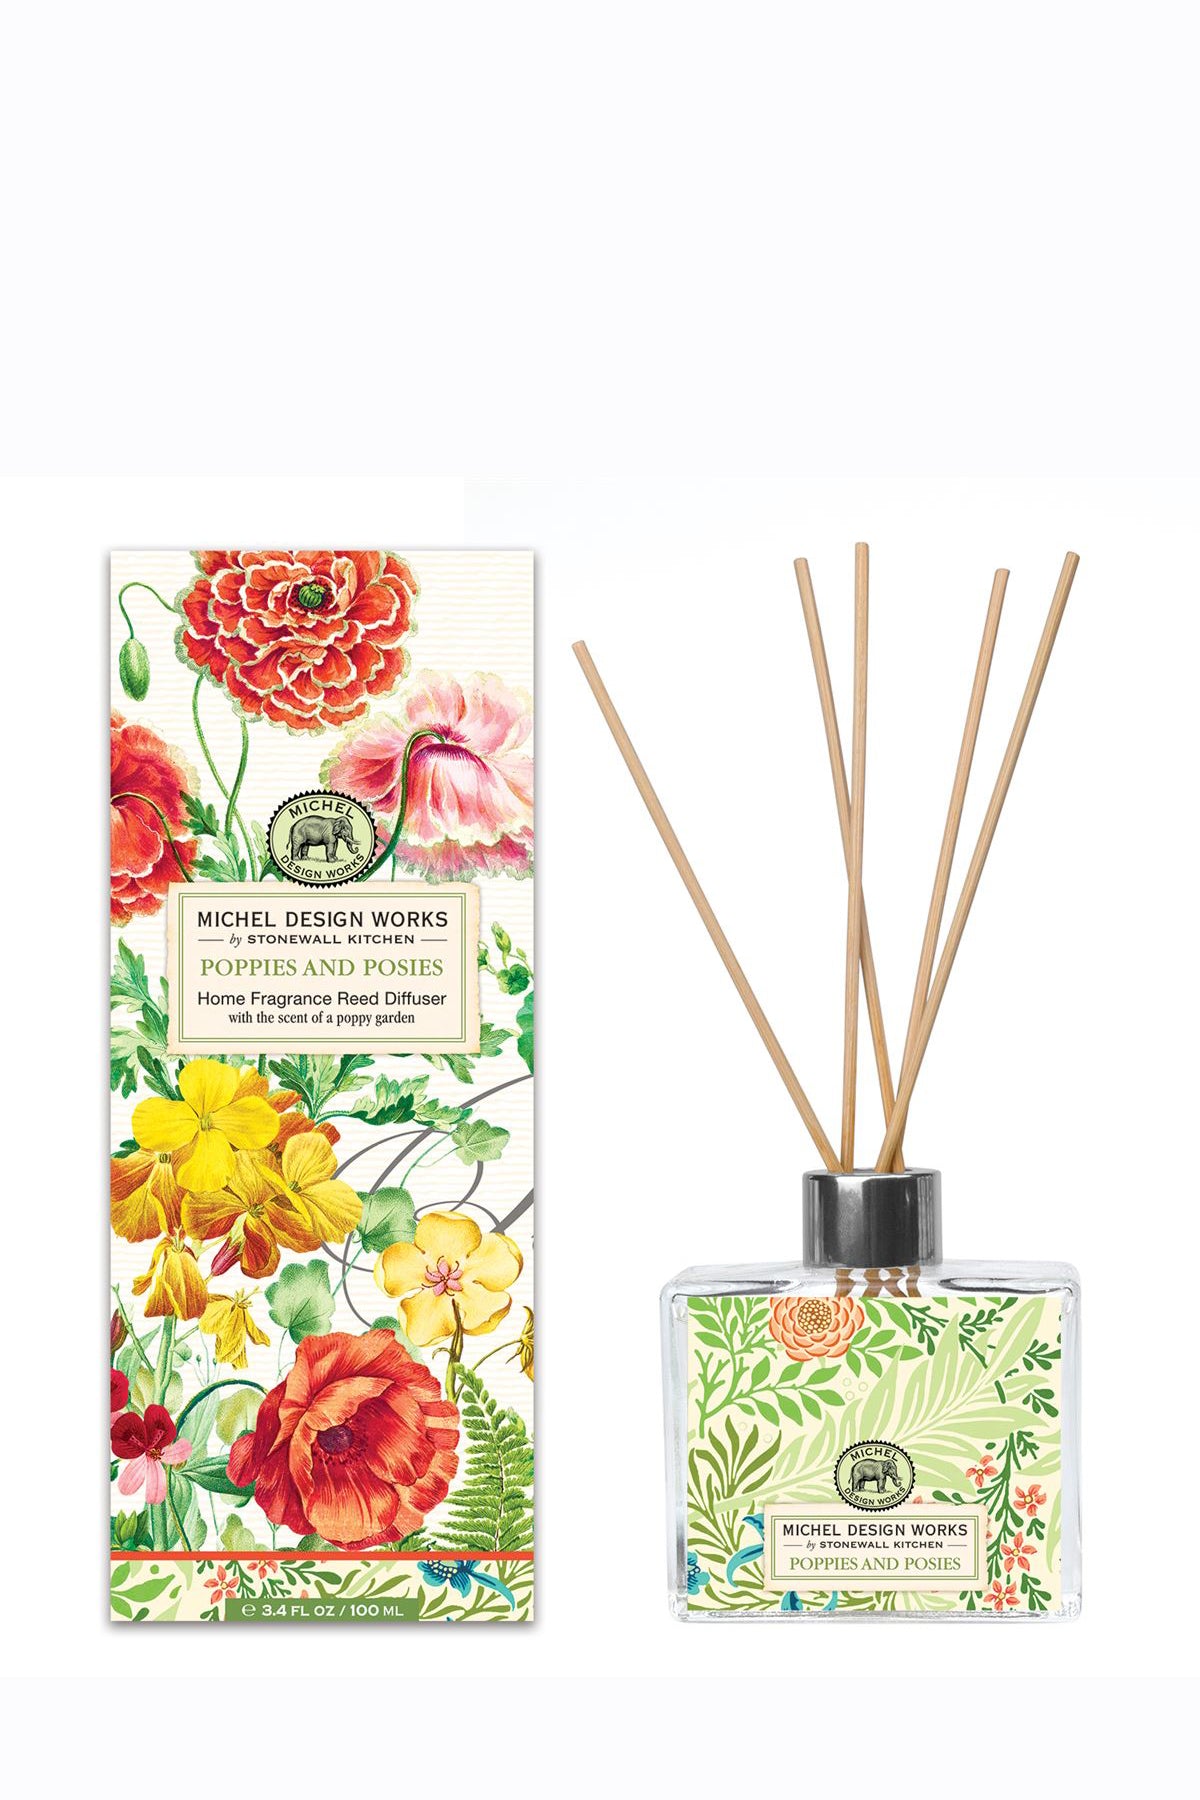 MICHEL DESIGN WORKS Poppies and Posies Reed Diffuser - Magpie Style